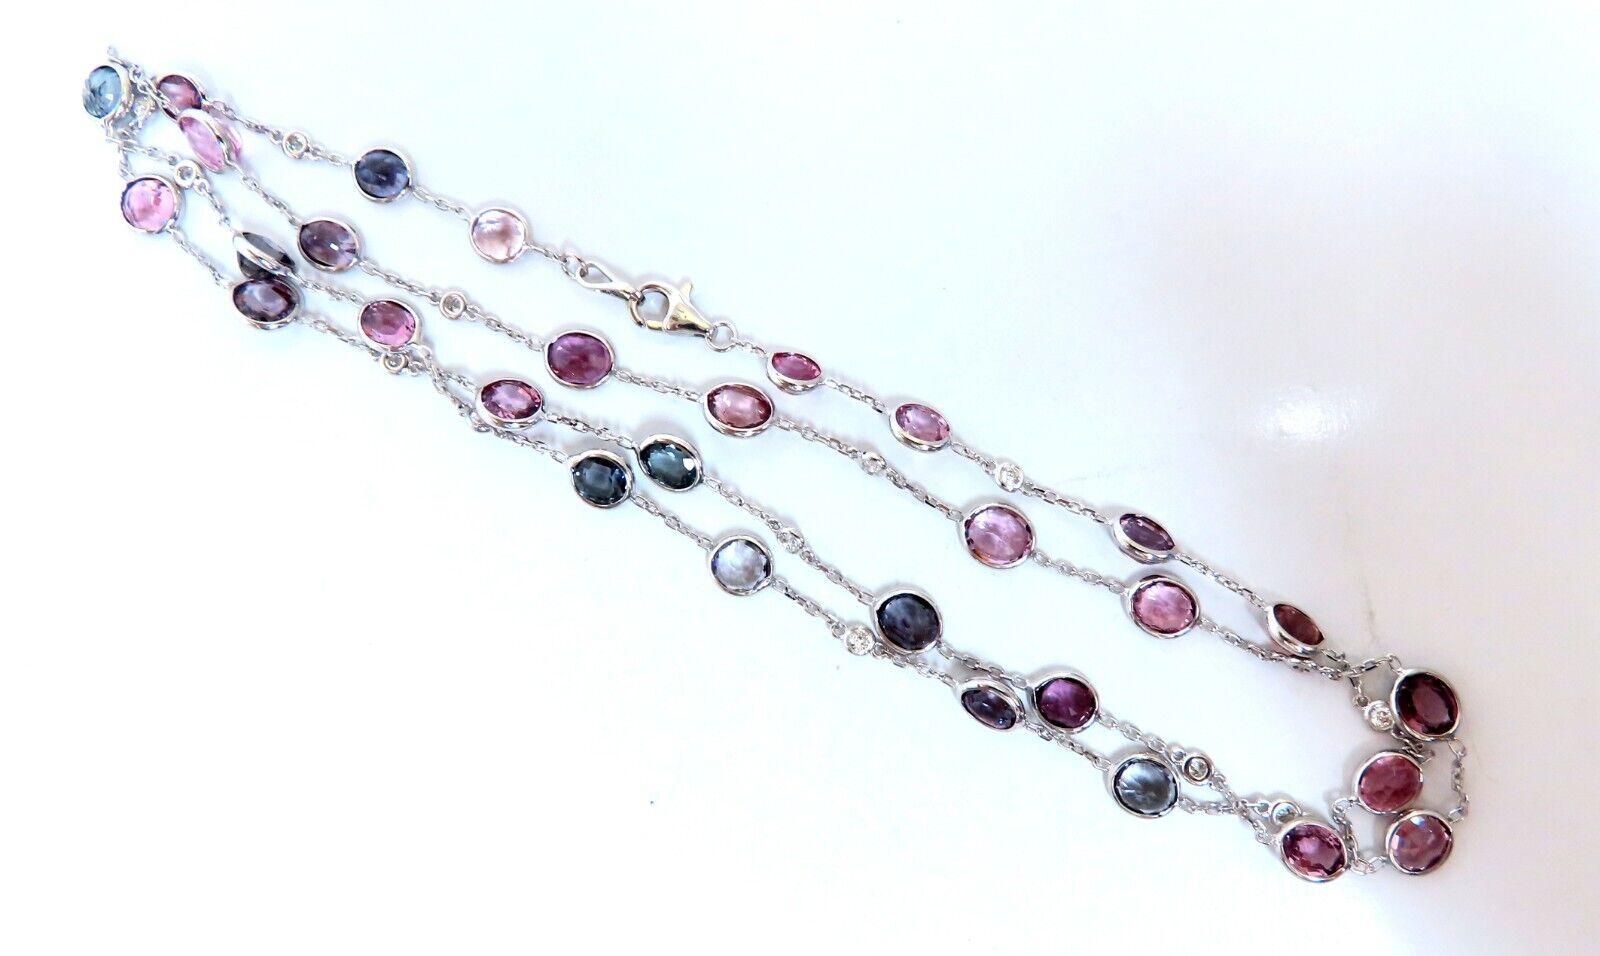 Natural spinel diamonds yard necklace.

Ranging colors: pink, greens, red, purple, blue, and teal.

Ovals cuts.

Average each 5x4 mm

Clean Clarity brilliant cuts

.45 carat natural round diamonds

G color vs2 clarity

14 karat white gold

11